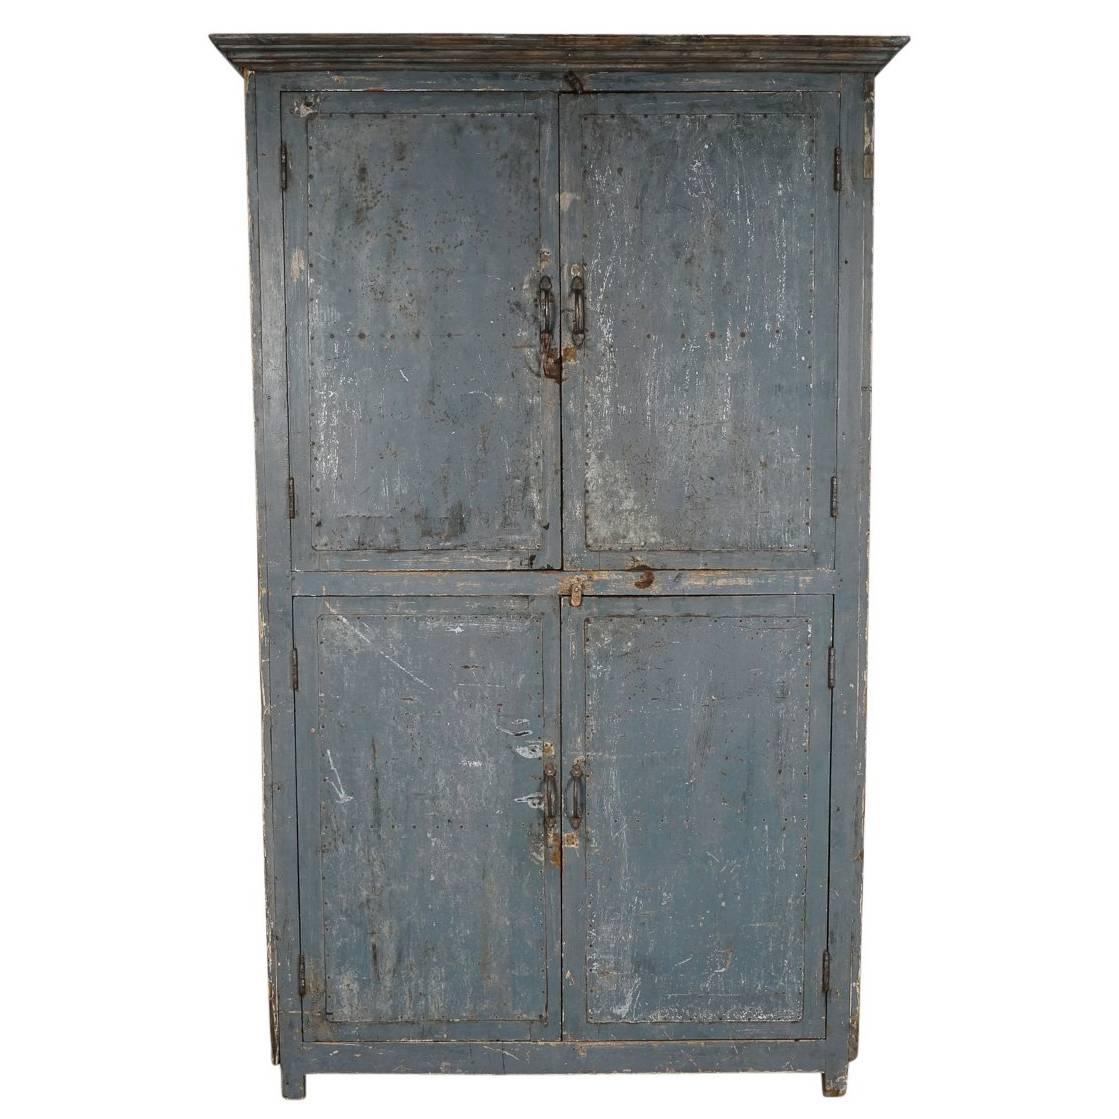 French Four-Door Cabinet in Original Blue Color